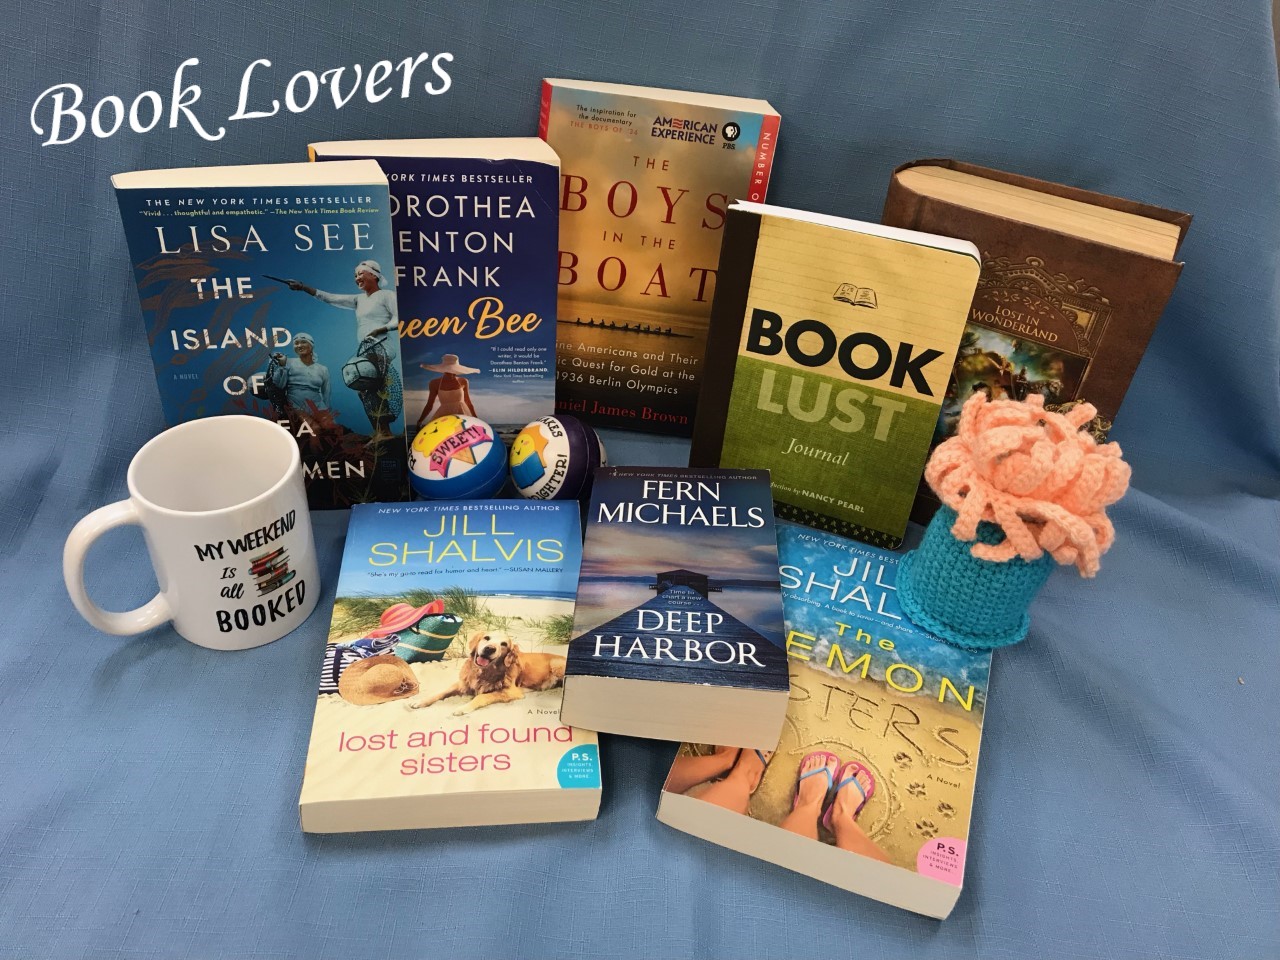 Book Lovers prize drawing